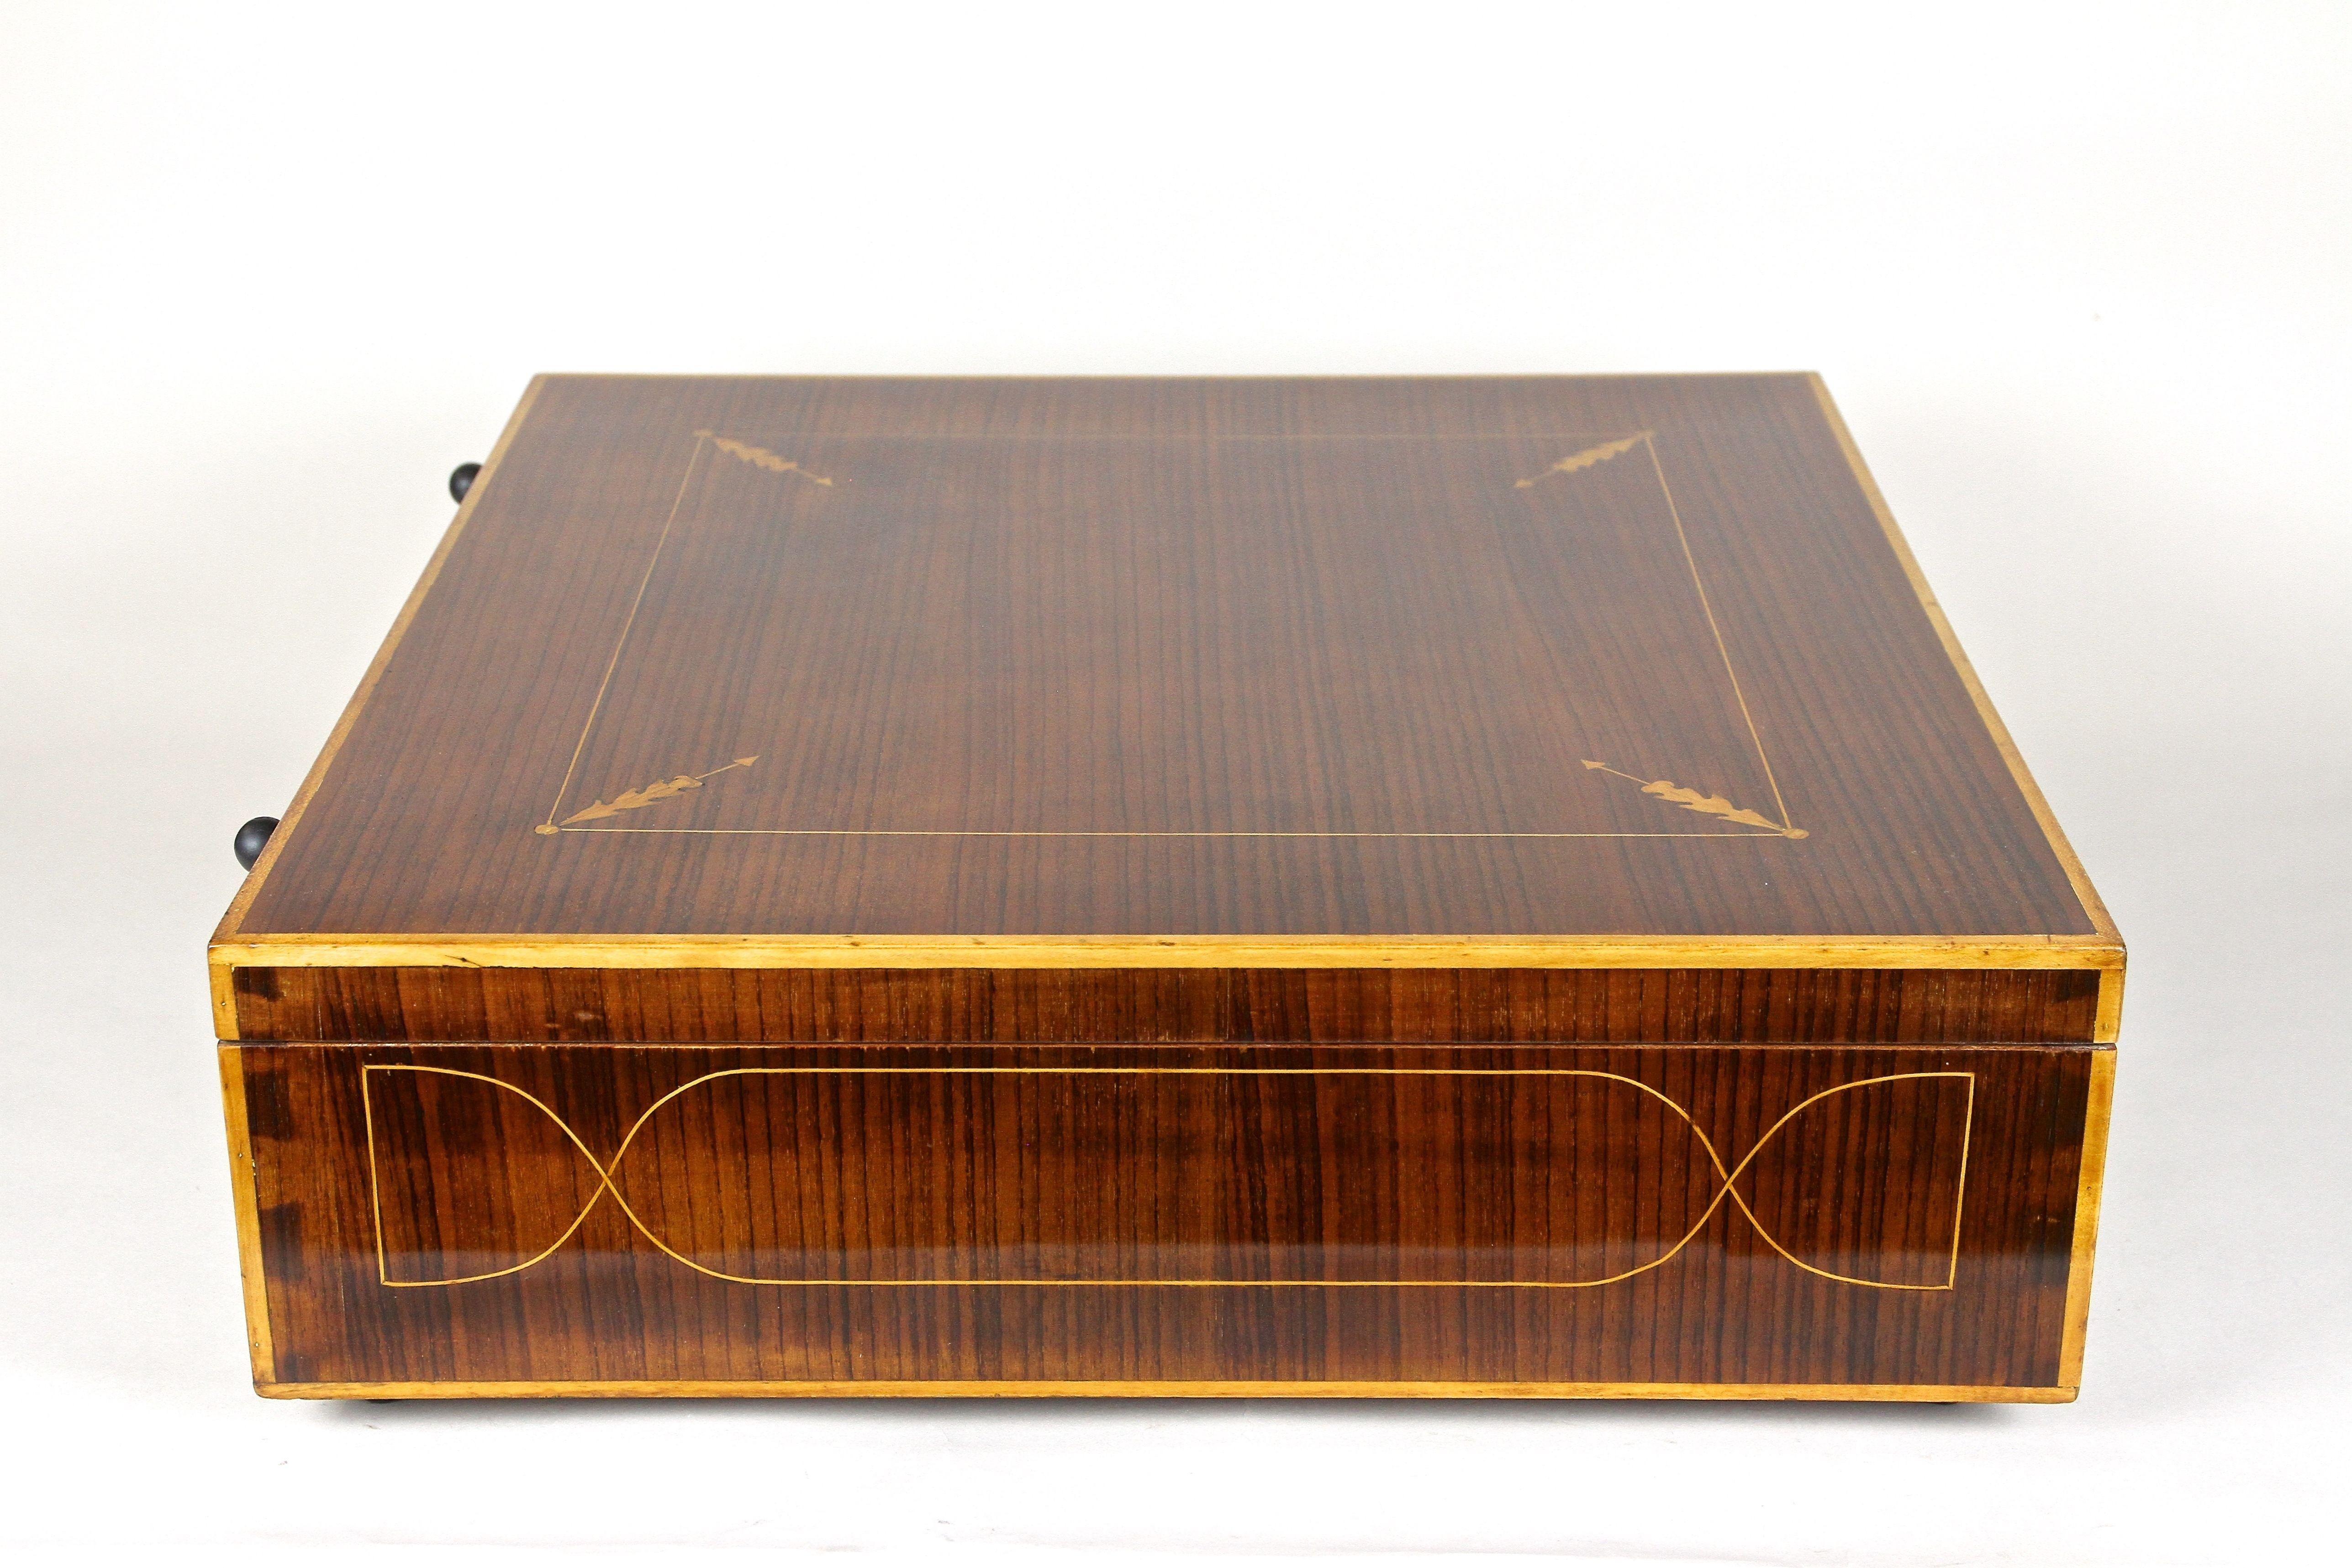 20th Century Art Nouveau Wooden Box with Marquetry Works, Austria circa 1900 2